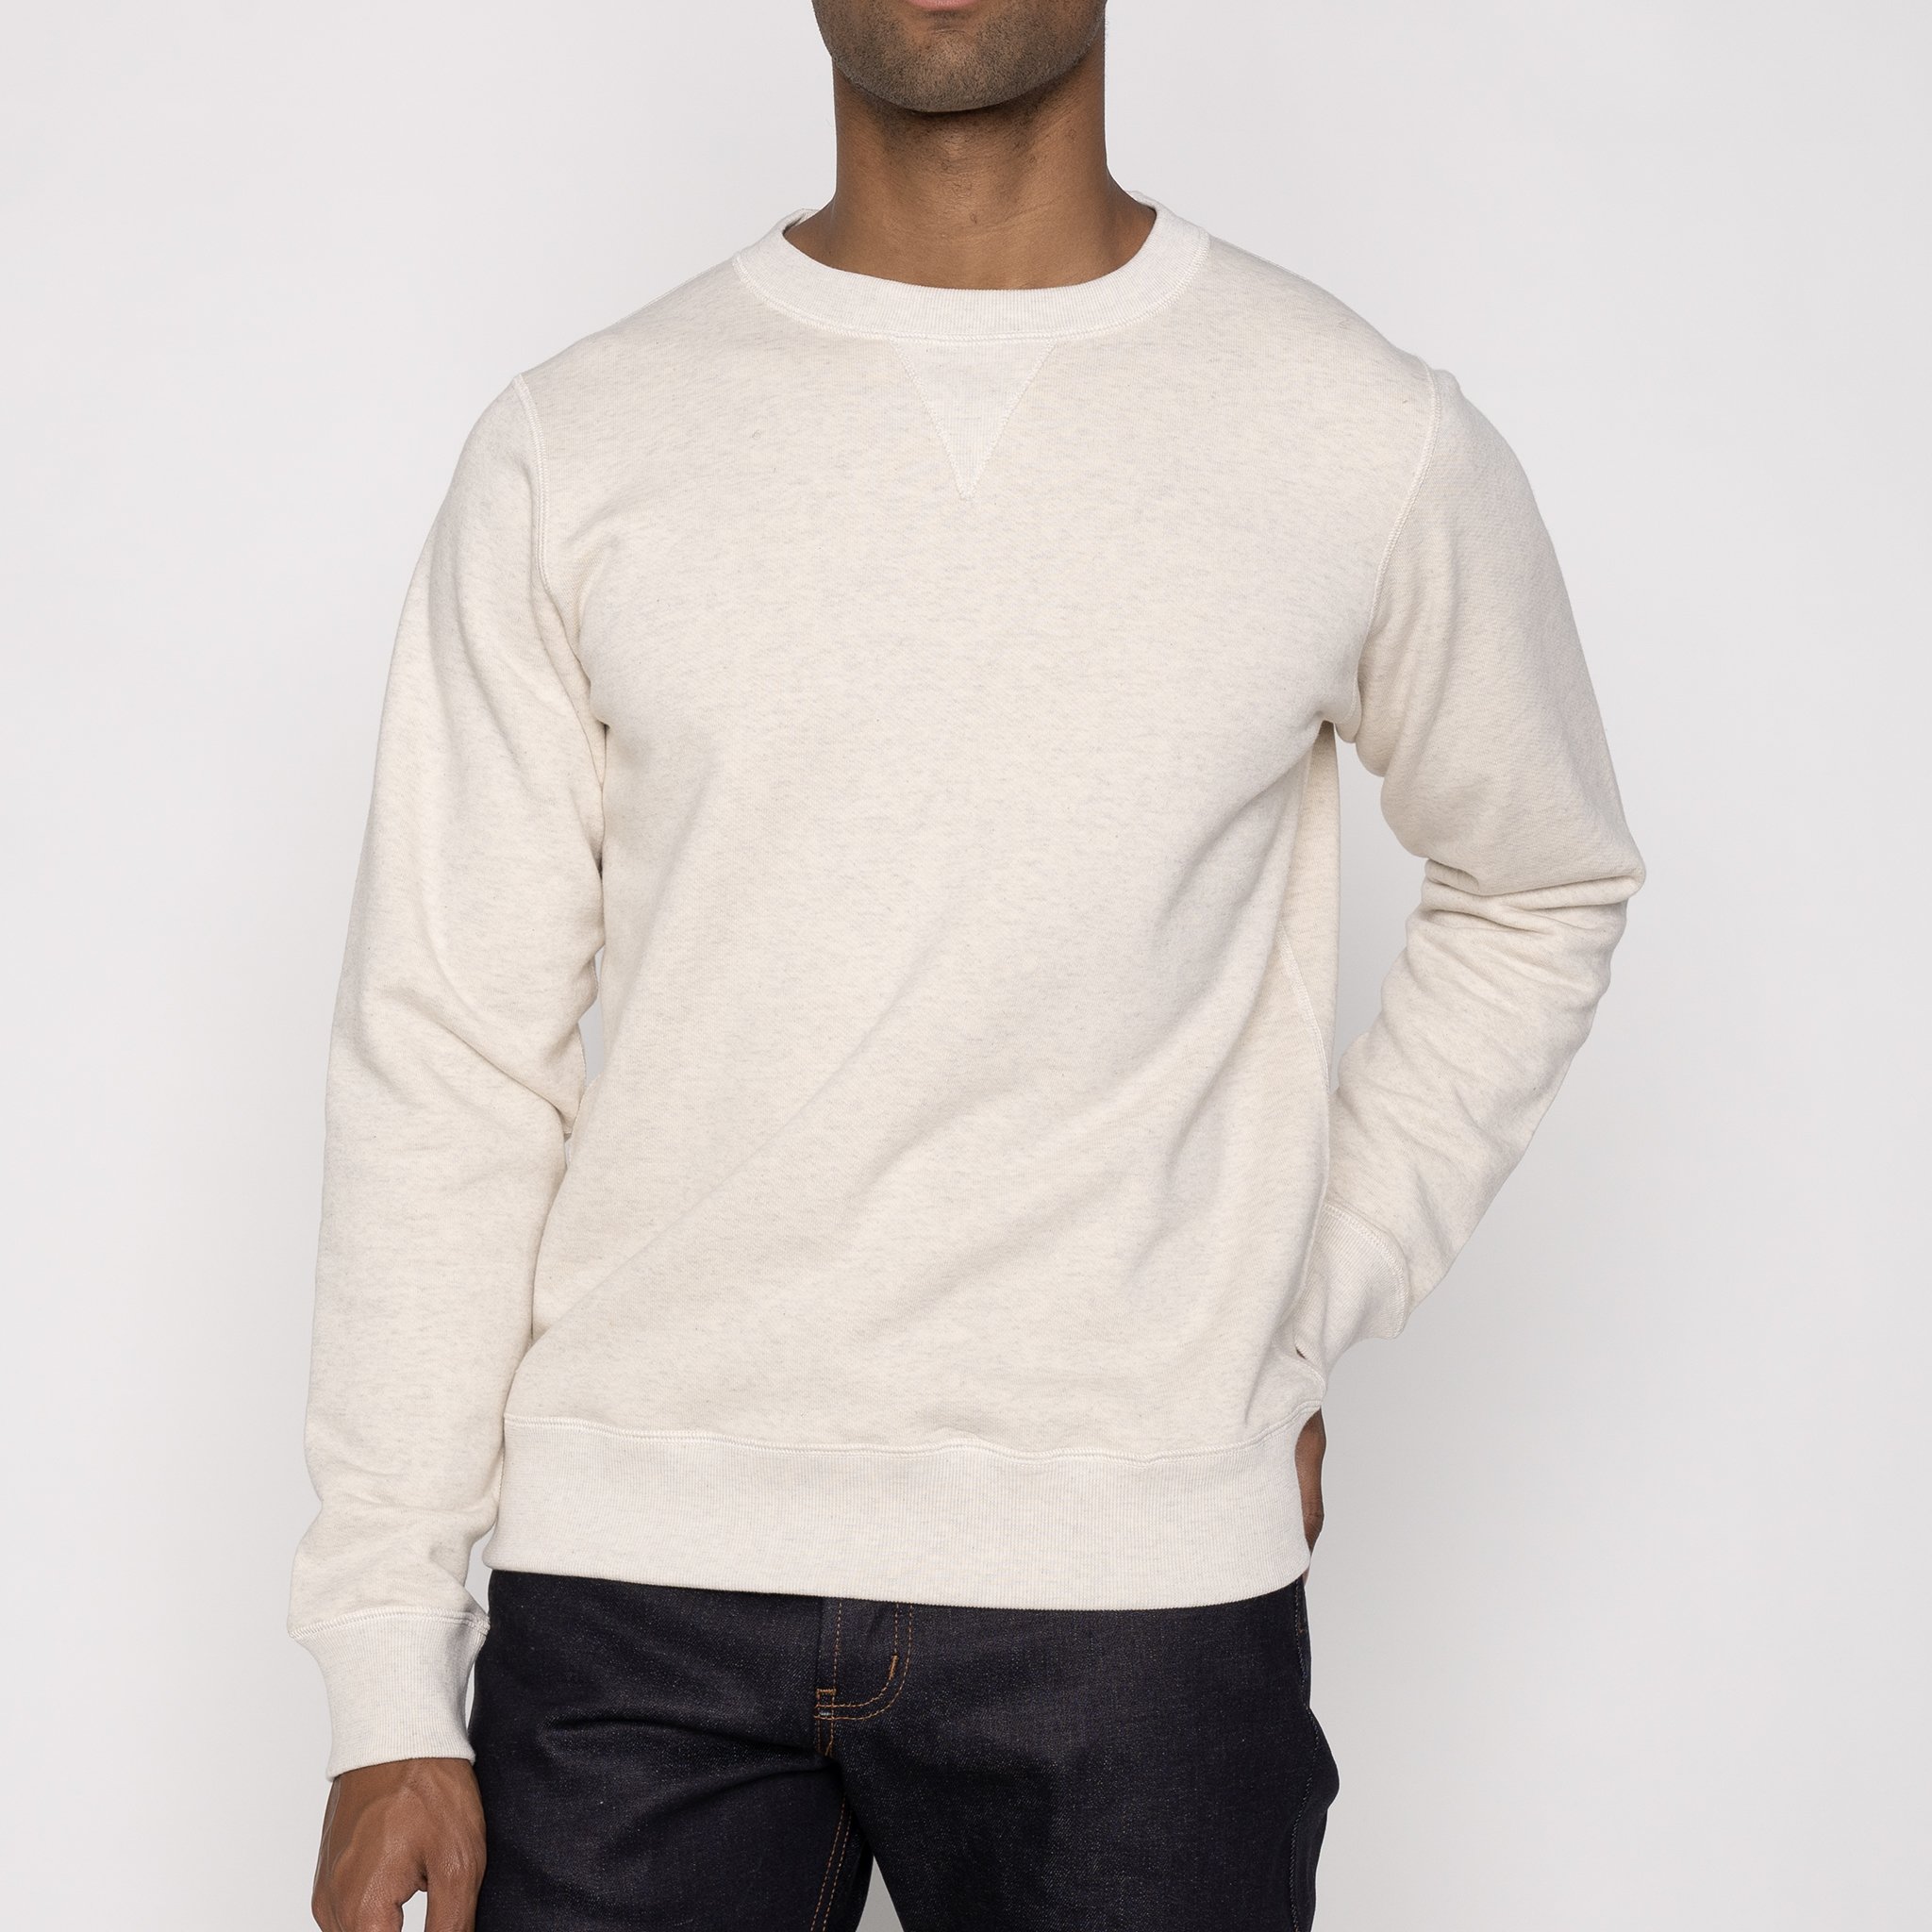  Crewneck - French Terry - Oatmeal 